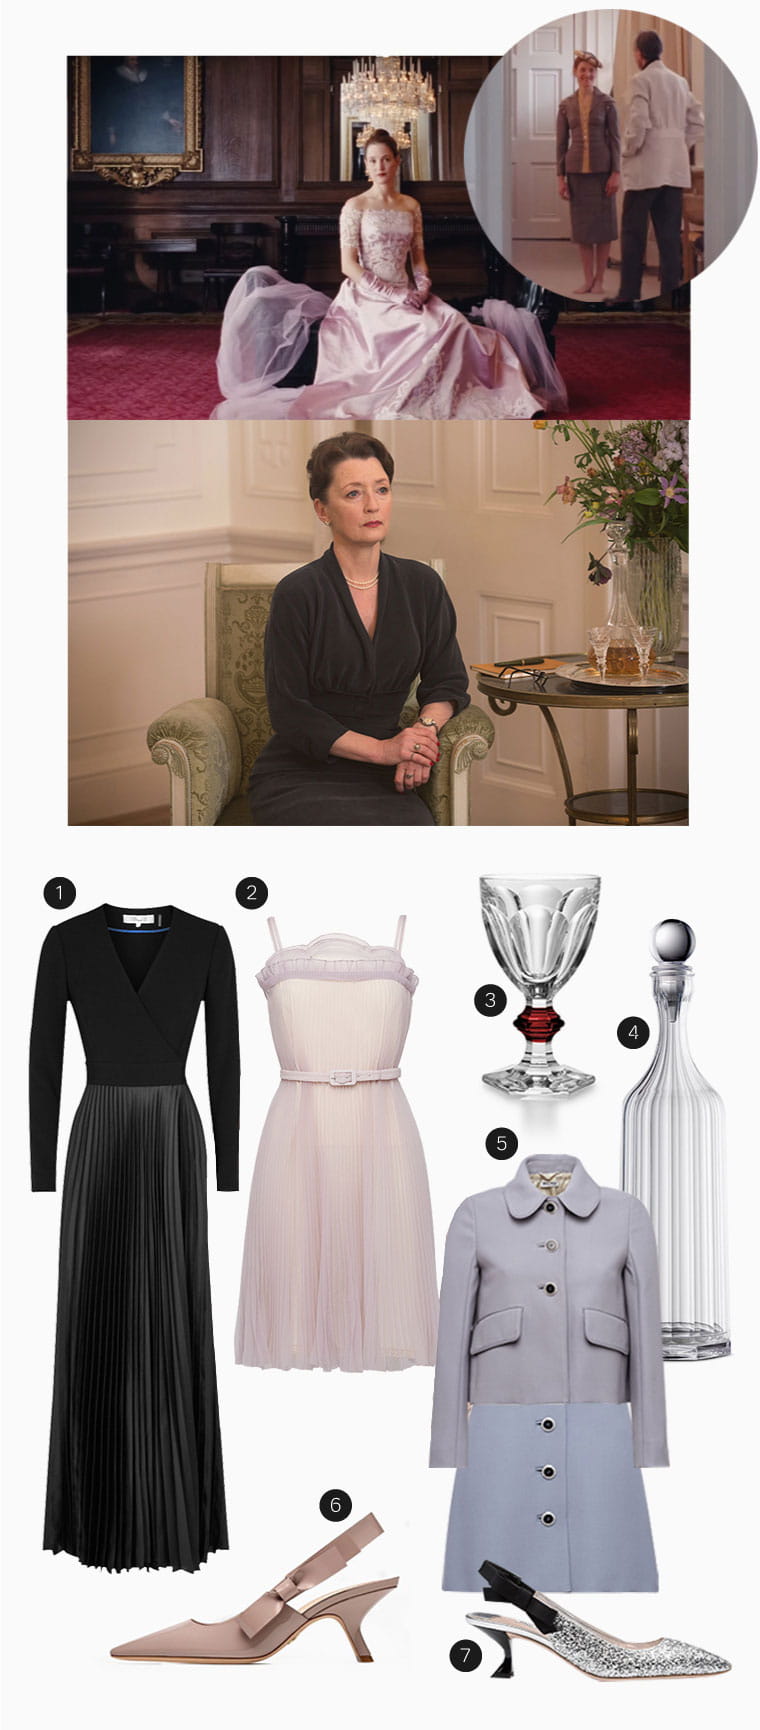 Here’s our pick of Phantom Thread style – with a modern update, of course